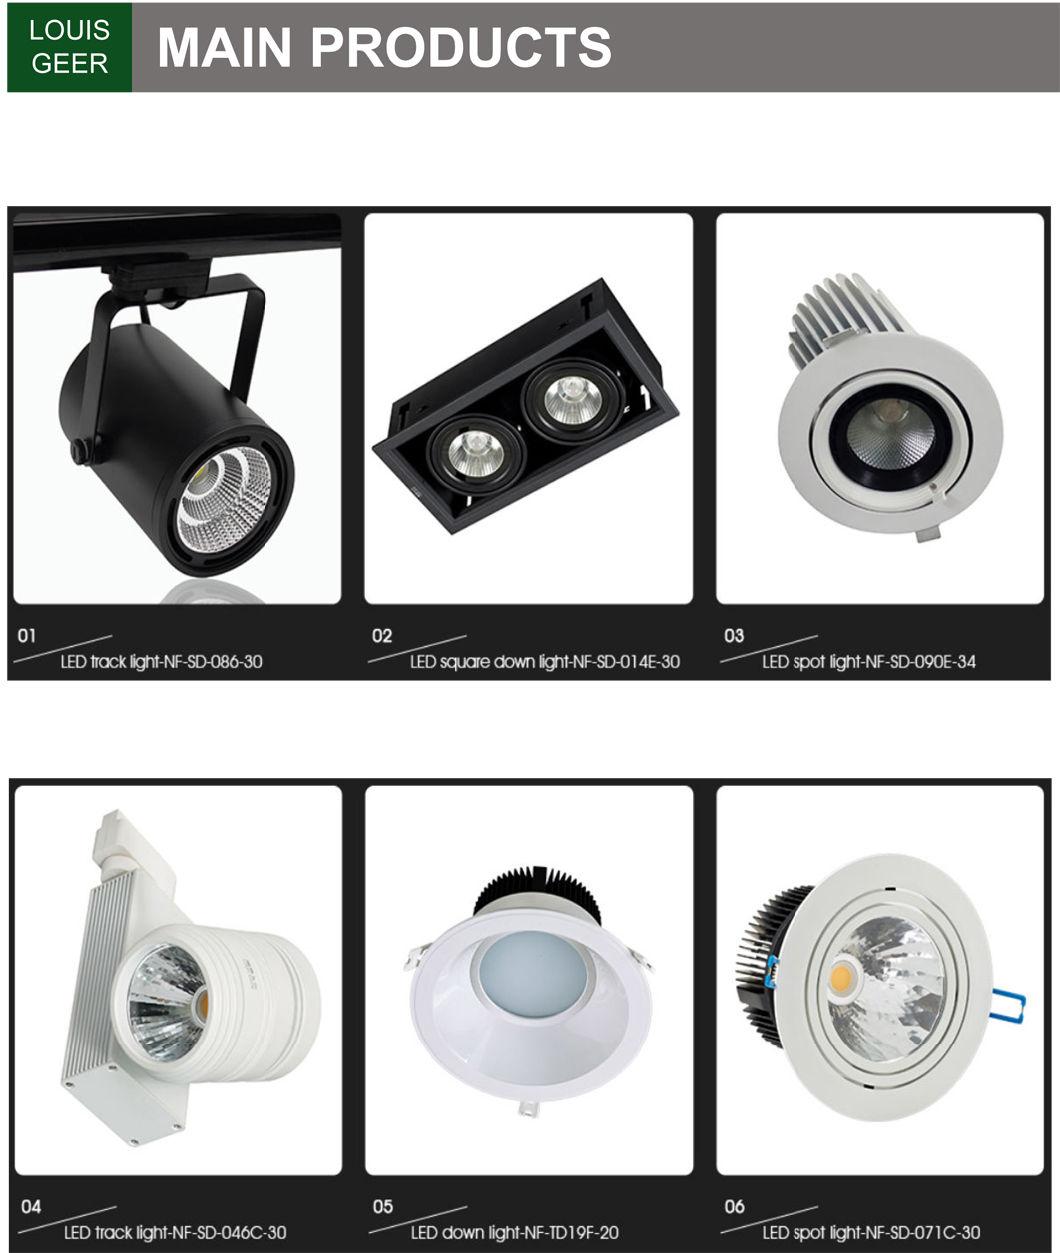 High Quality PC and Aluminum Downlight Ceiling Recessed Adjustable 8W COB Round LED Spot Down Light